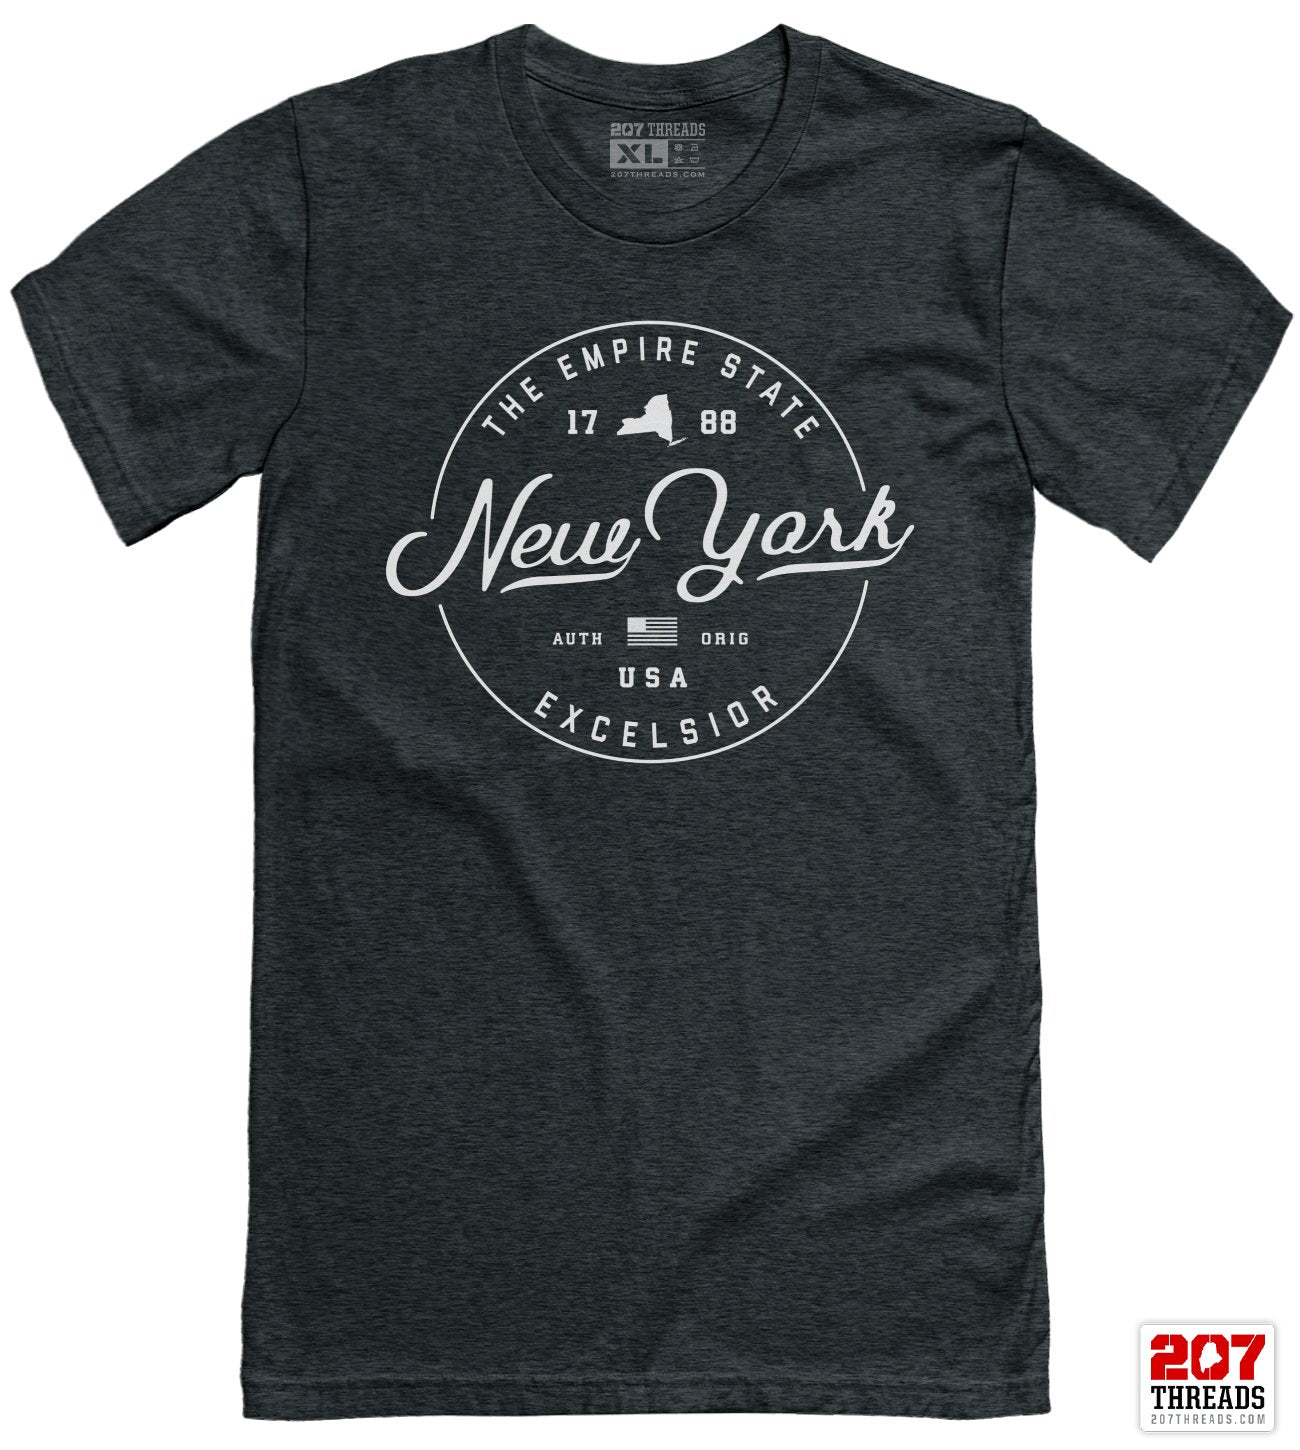 State of New York T-Shirt